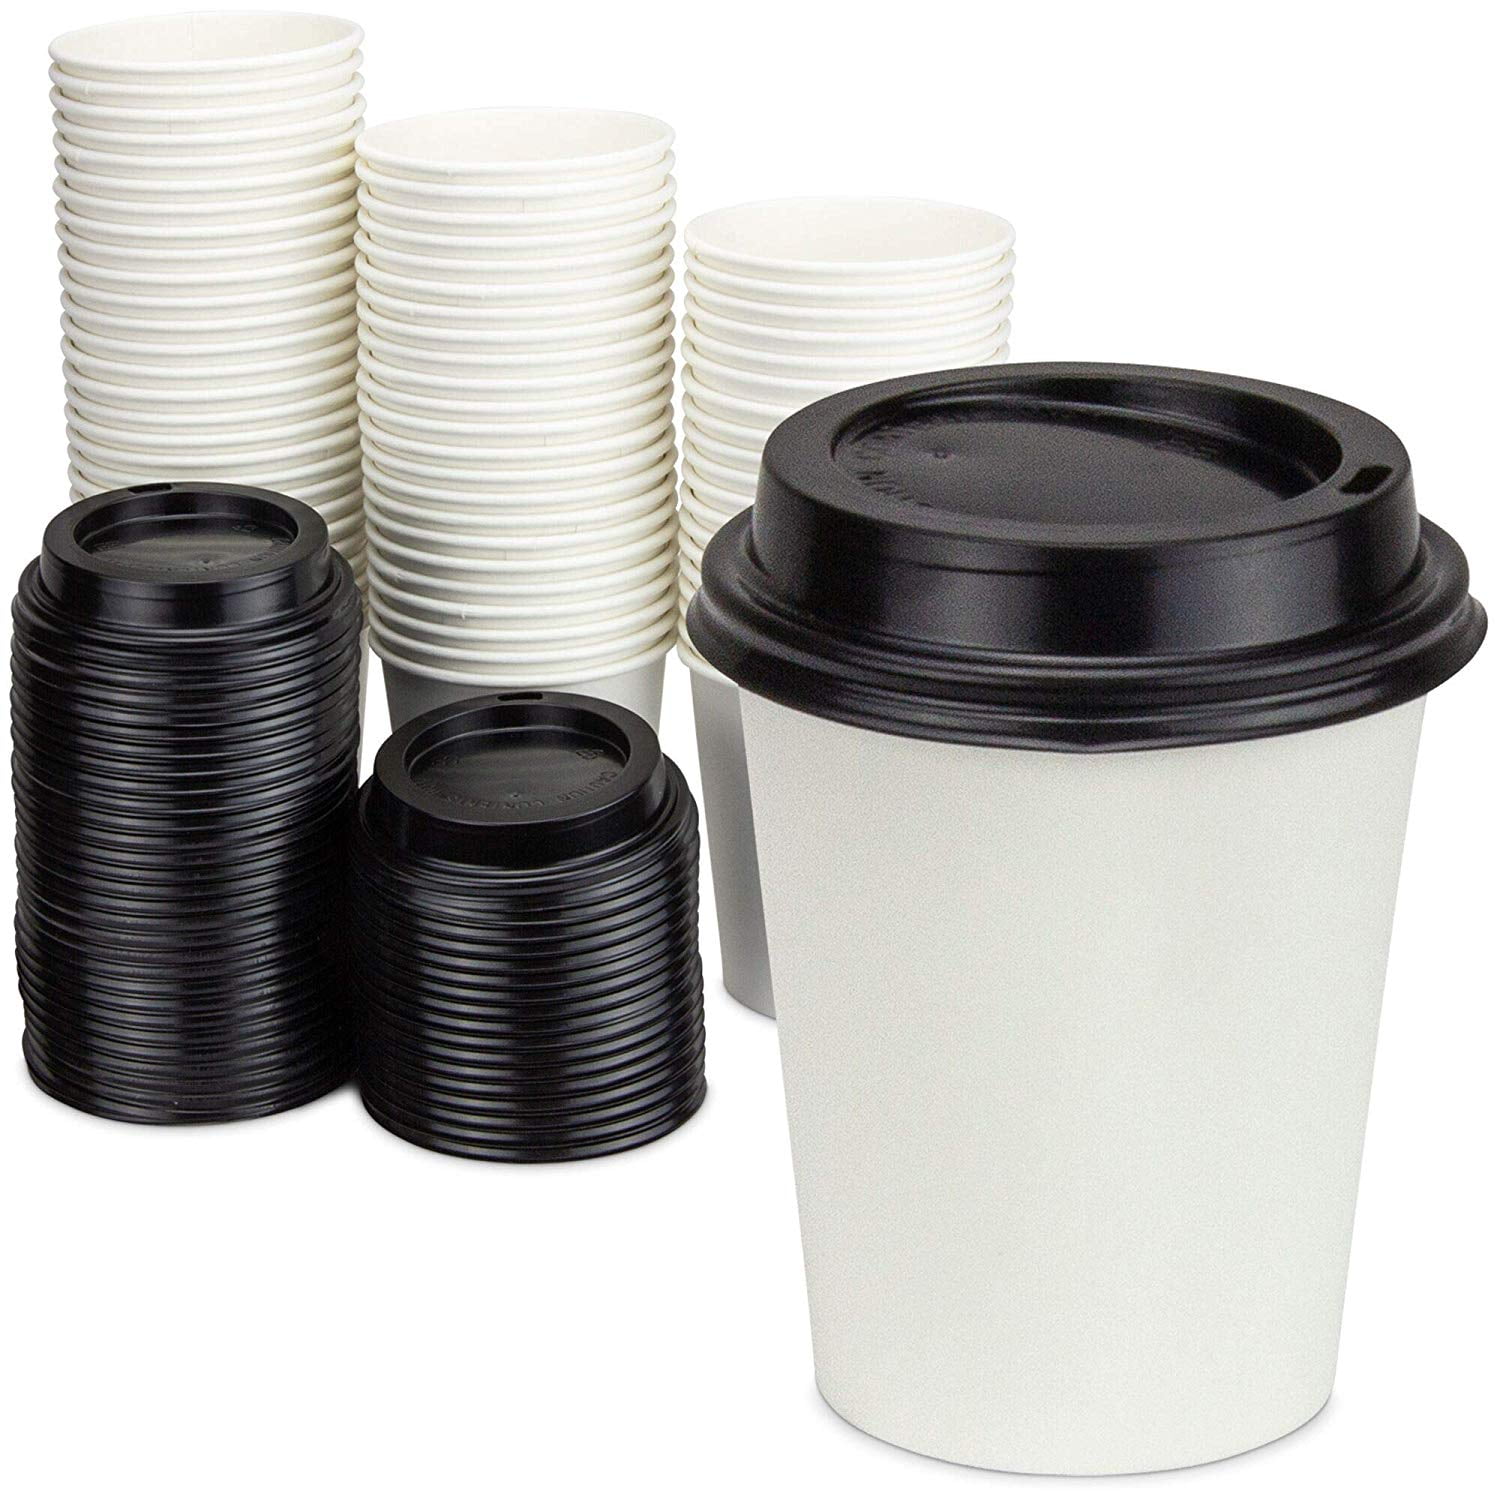 Pack of 100x Disposable Reusable Tea Coffee Hot Drink Birthdays Party Mug Cups